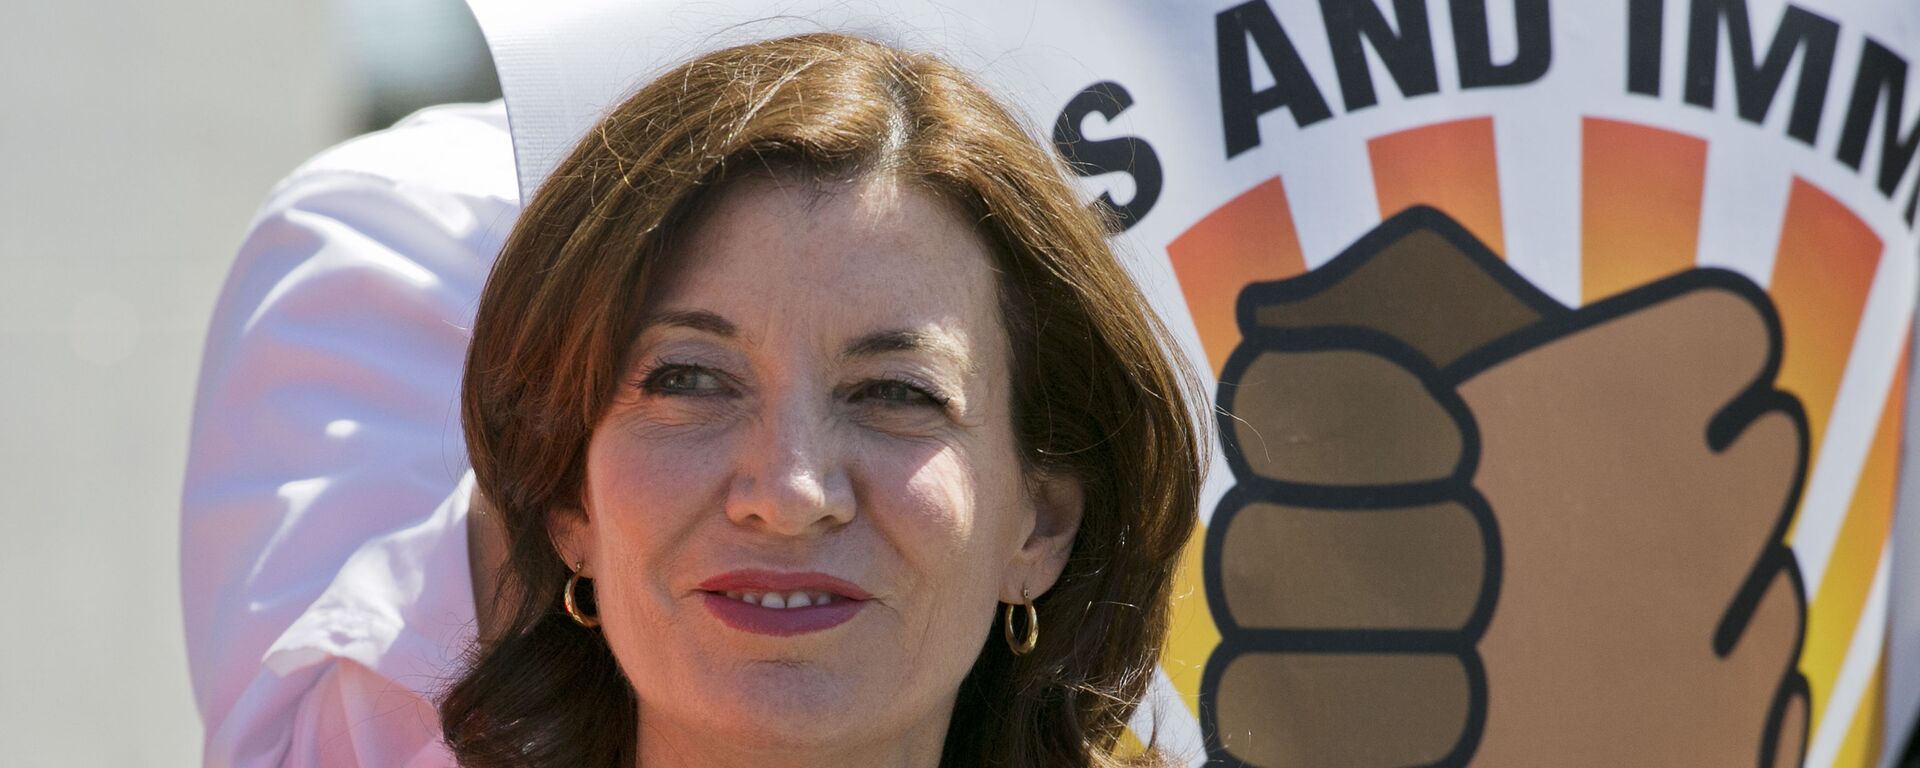 New York's Lt. Gov. Kathy Hochul attends a May Day pro-labor and immigration rights rally, May 1, 2018, in New York - Sputnik International, 1920, 18.02.2024